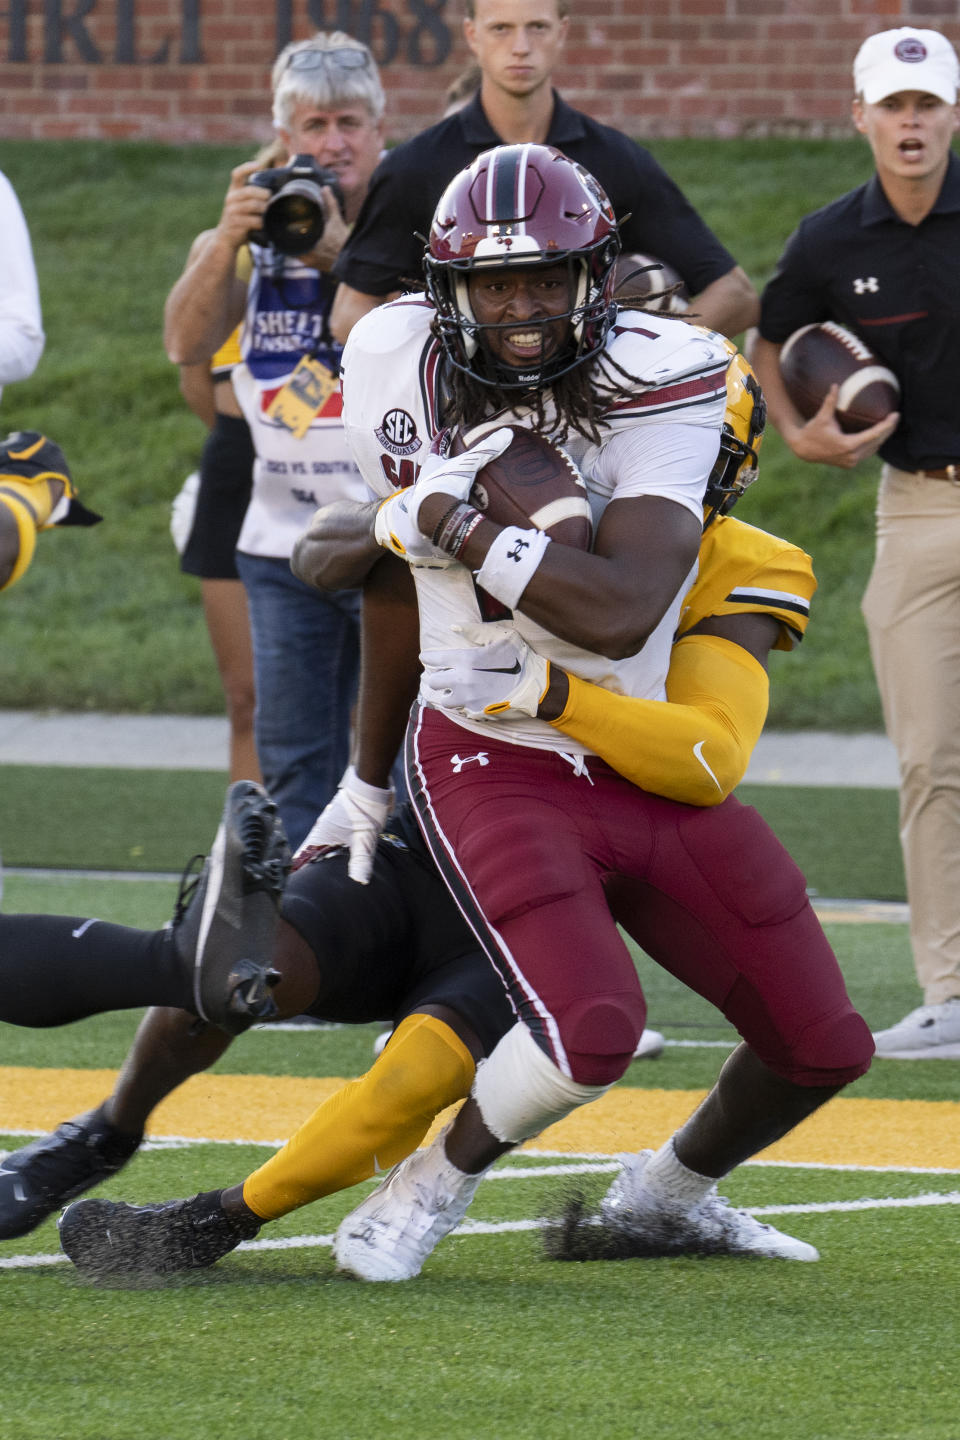 South Carolina tight end Trey Knox, top, is tackled by Missouri defensive back Jaylon Carlies during the fourth quarter of an NCAA college football game Saturday, Oct. 21, 2023, in Columbia, Mo. Missouri won 34-12. (AP Photo/L.G. Patterson)